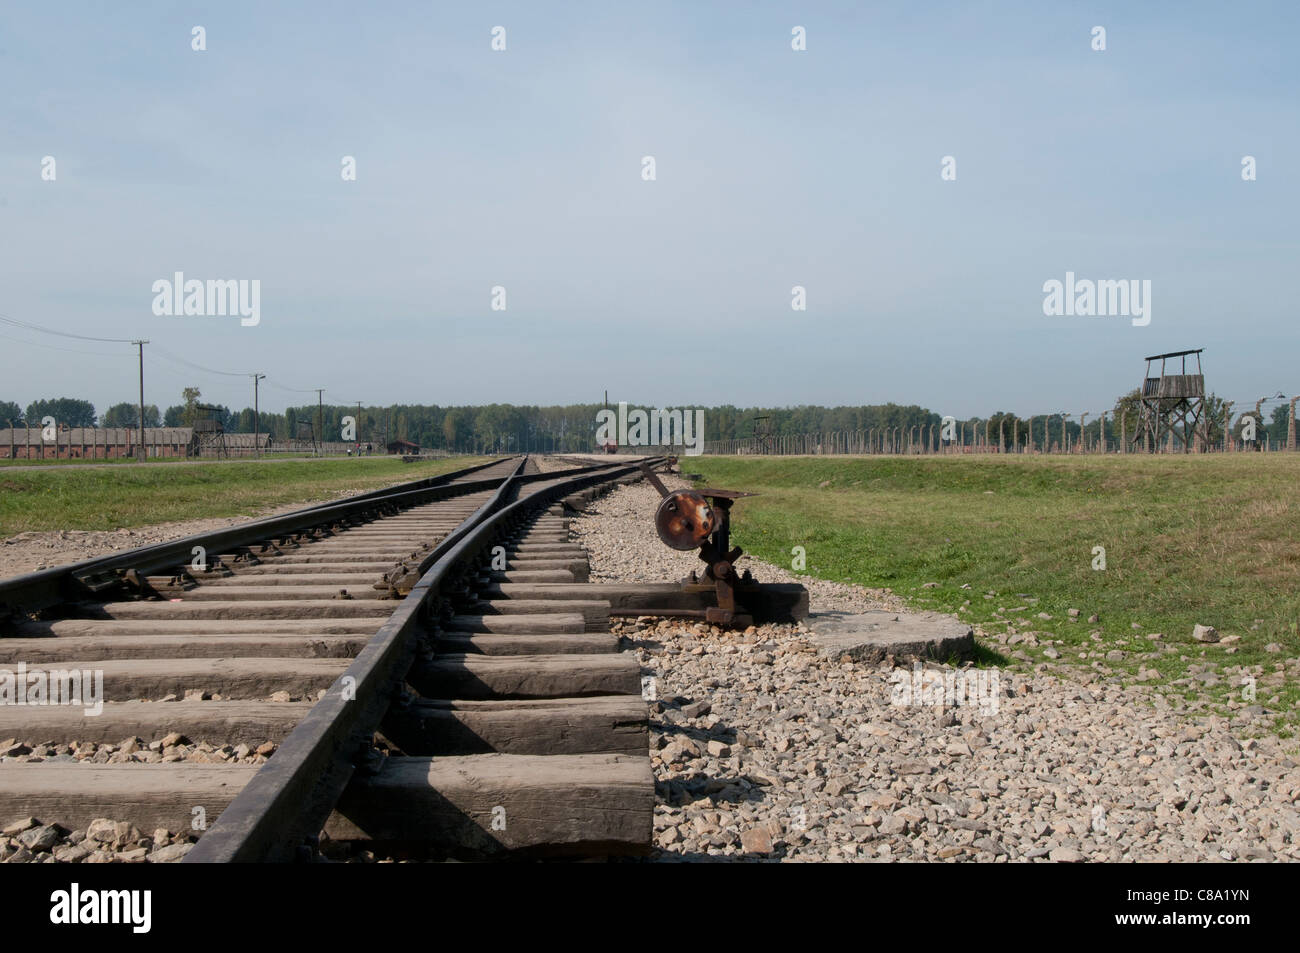 Railroad tracks leading to the new inmates arrival siding, Auschwitz II-Birkenau concentration and extermination camp, Poland Stock Photo